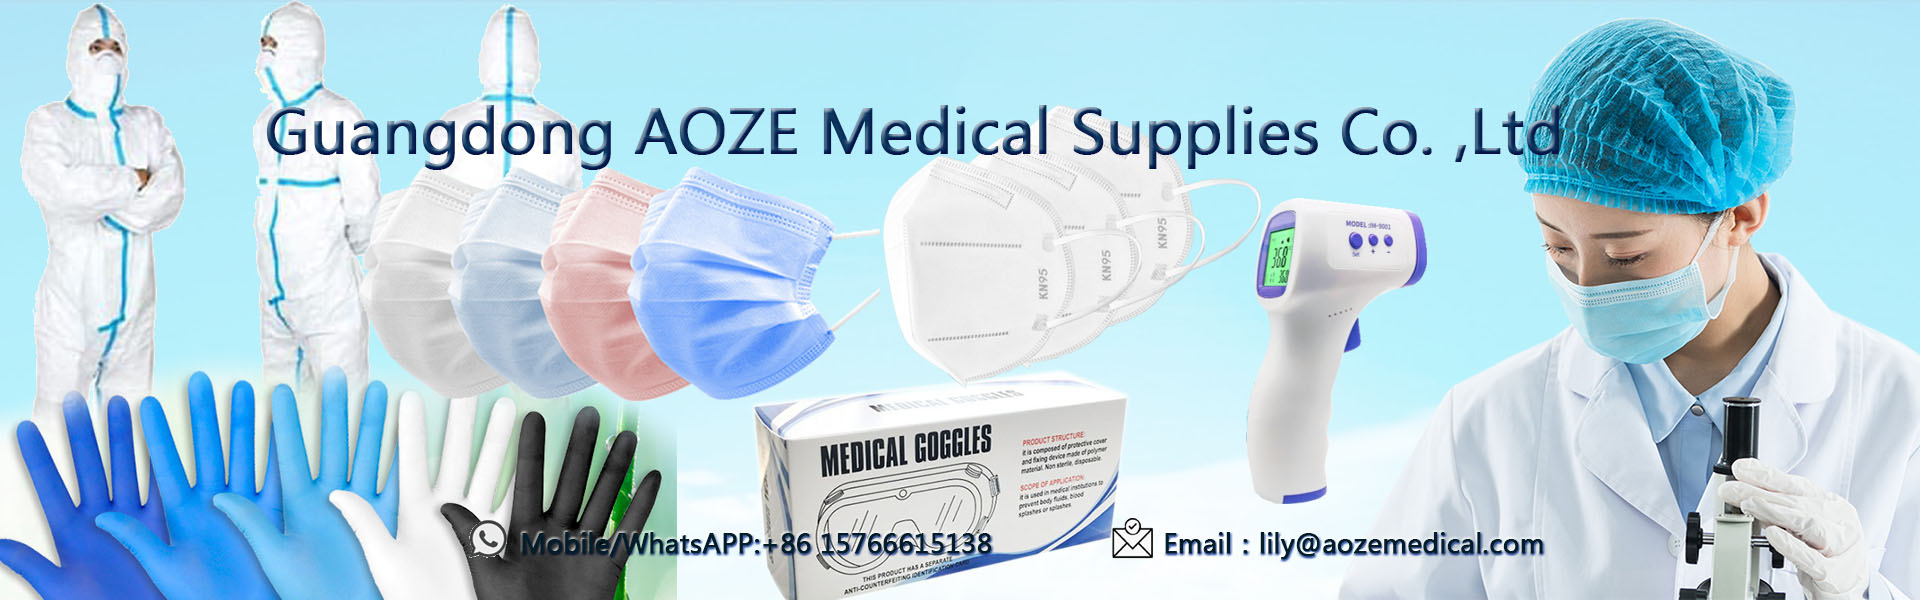 3ply disposable mask,kn95 face mask,surgical face mask,Guangdong AOZE Medical Supplies Co.,Ltd